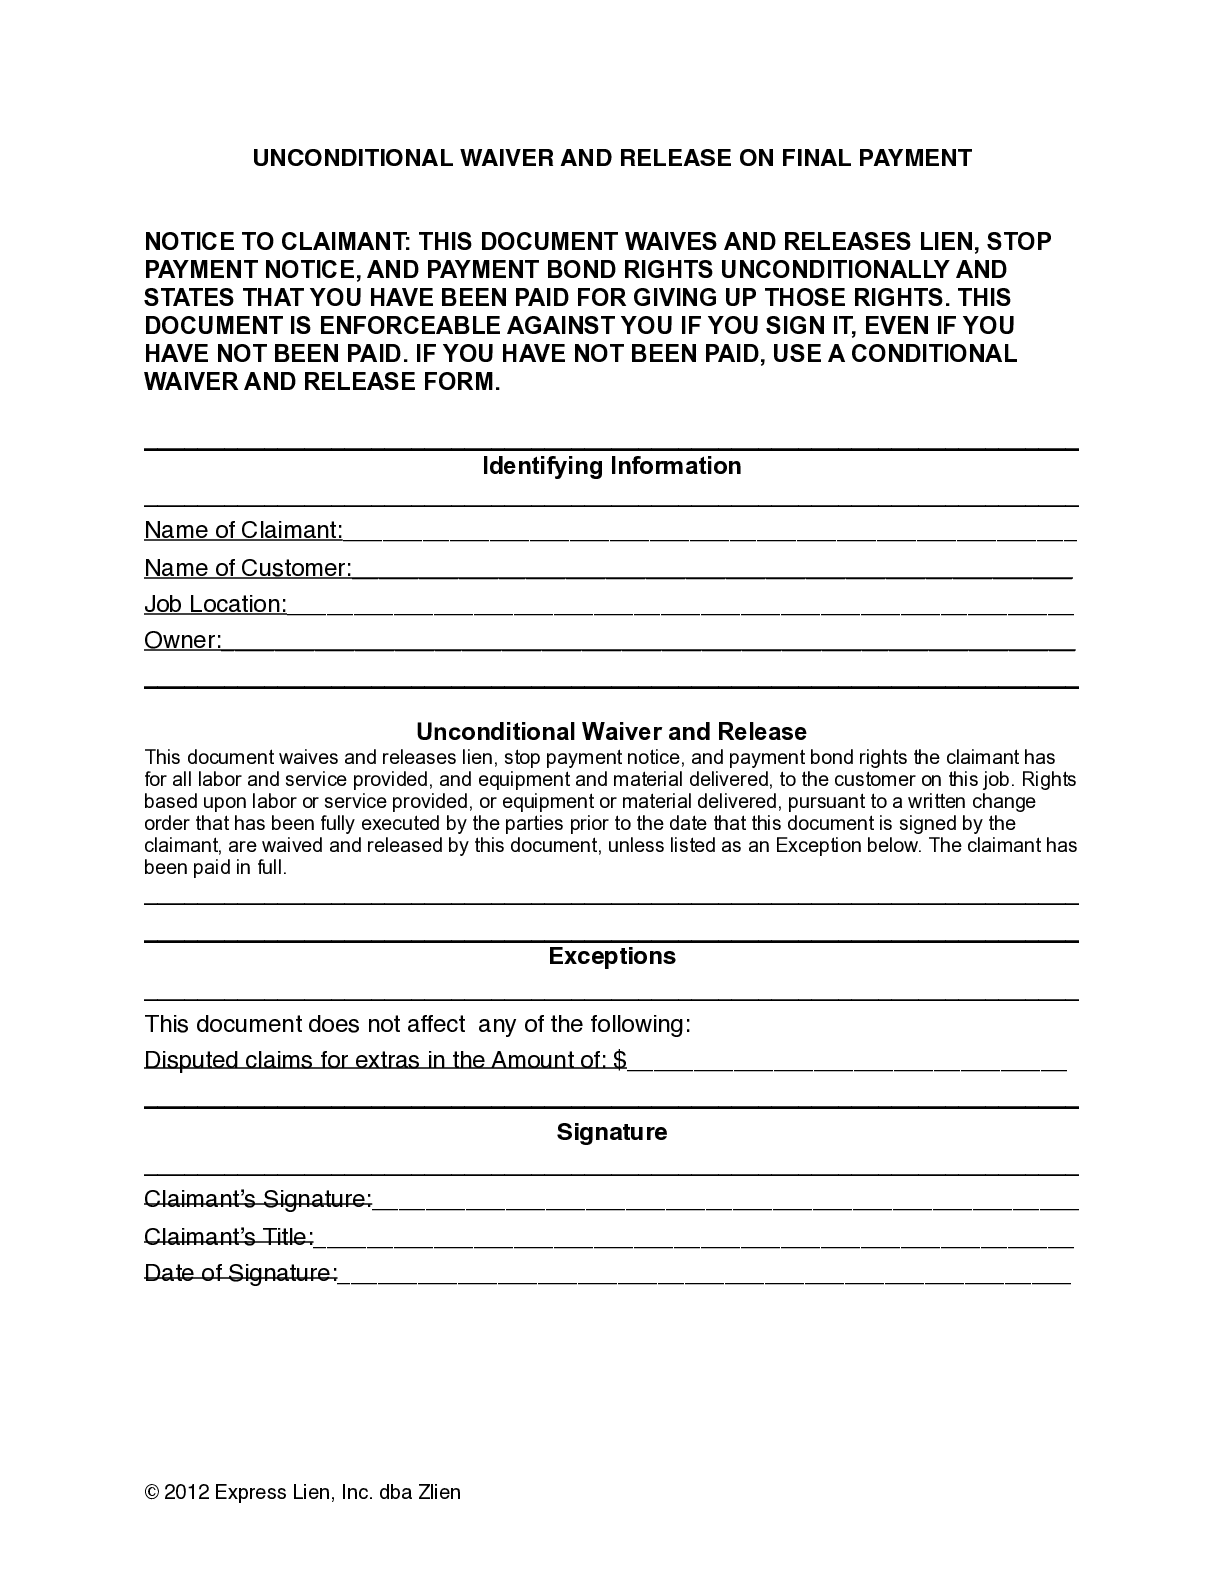 Idaho Final Unconditional Lien Waiver Form - free from